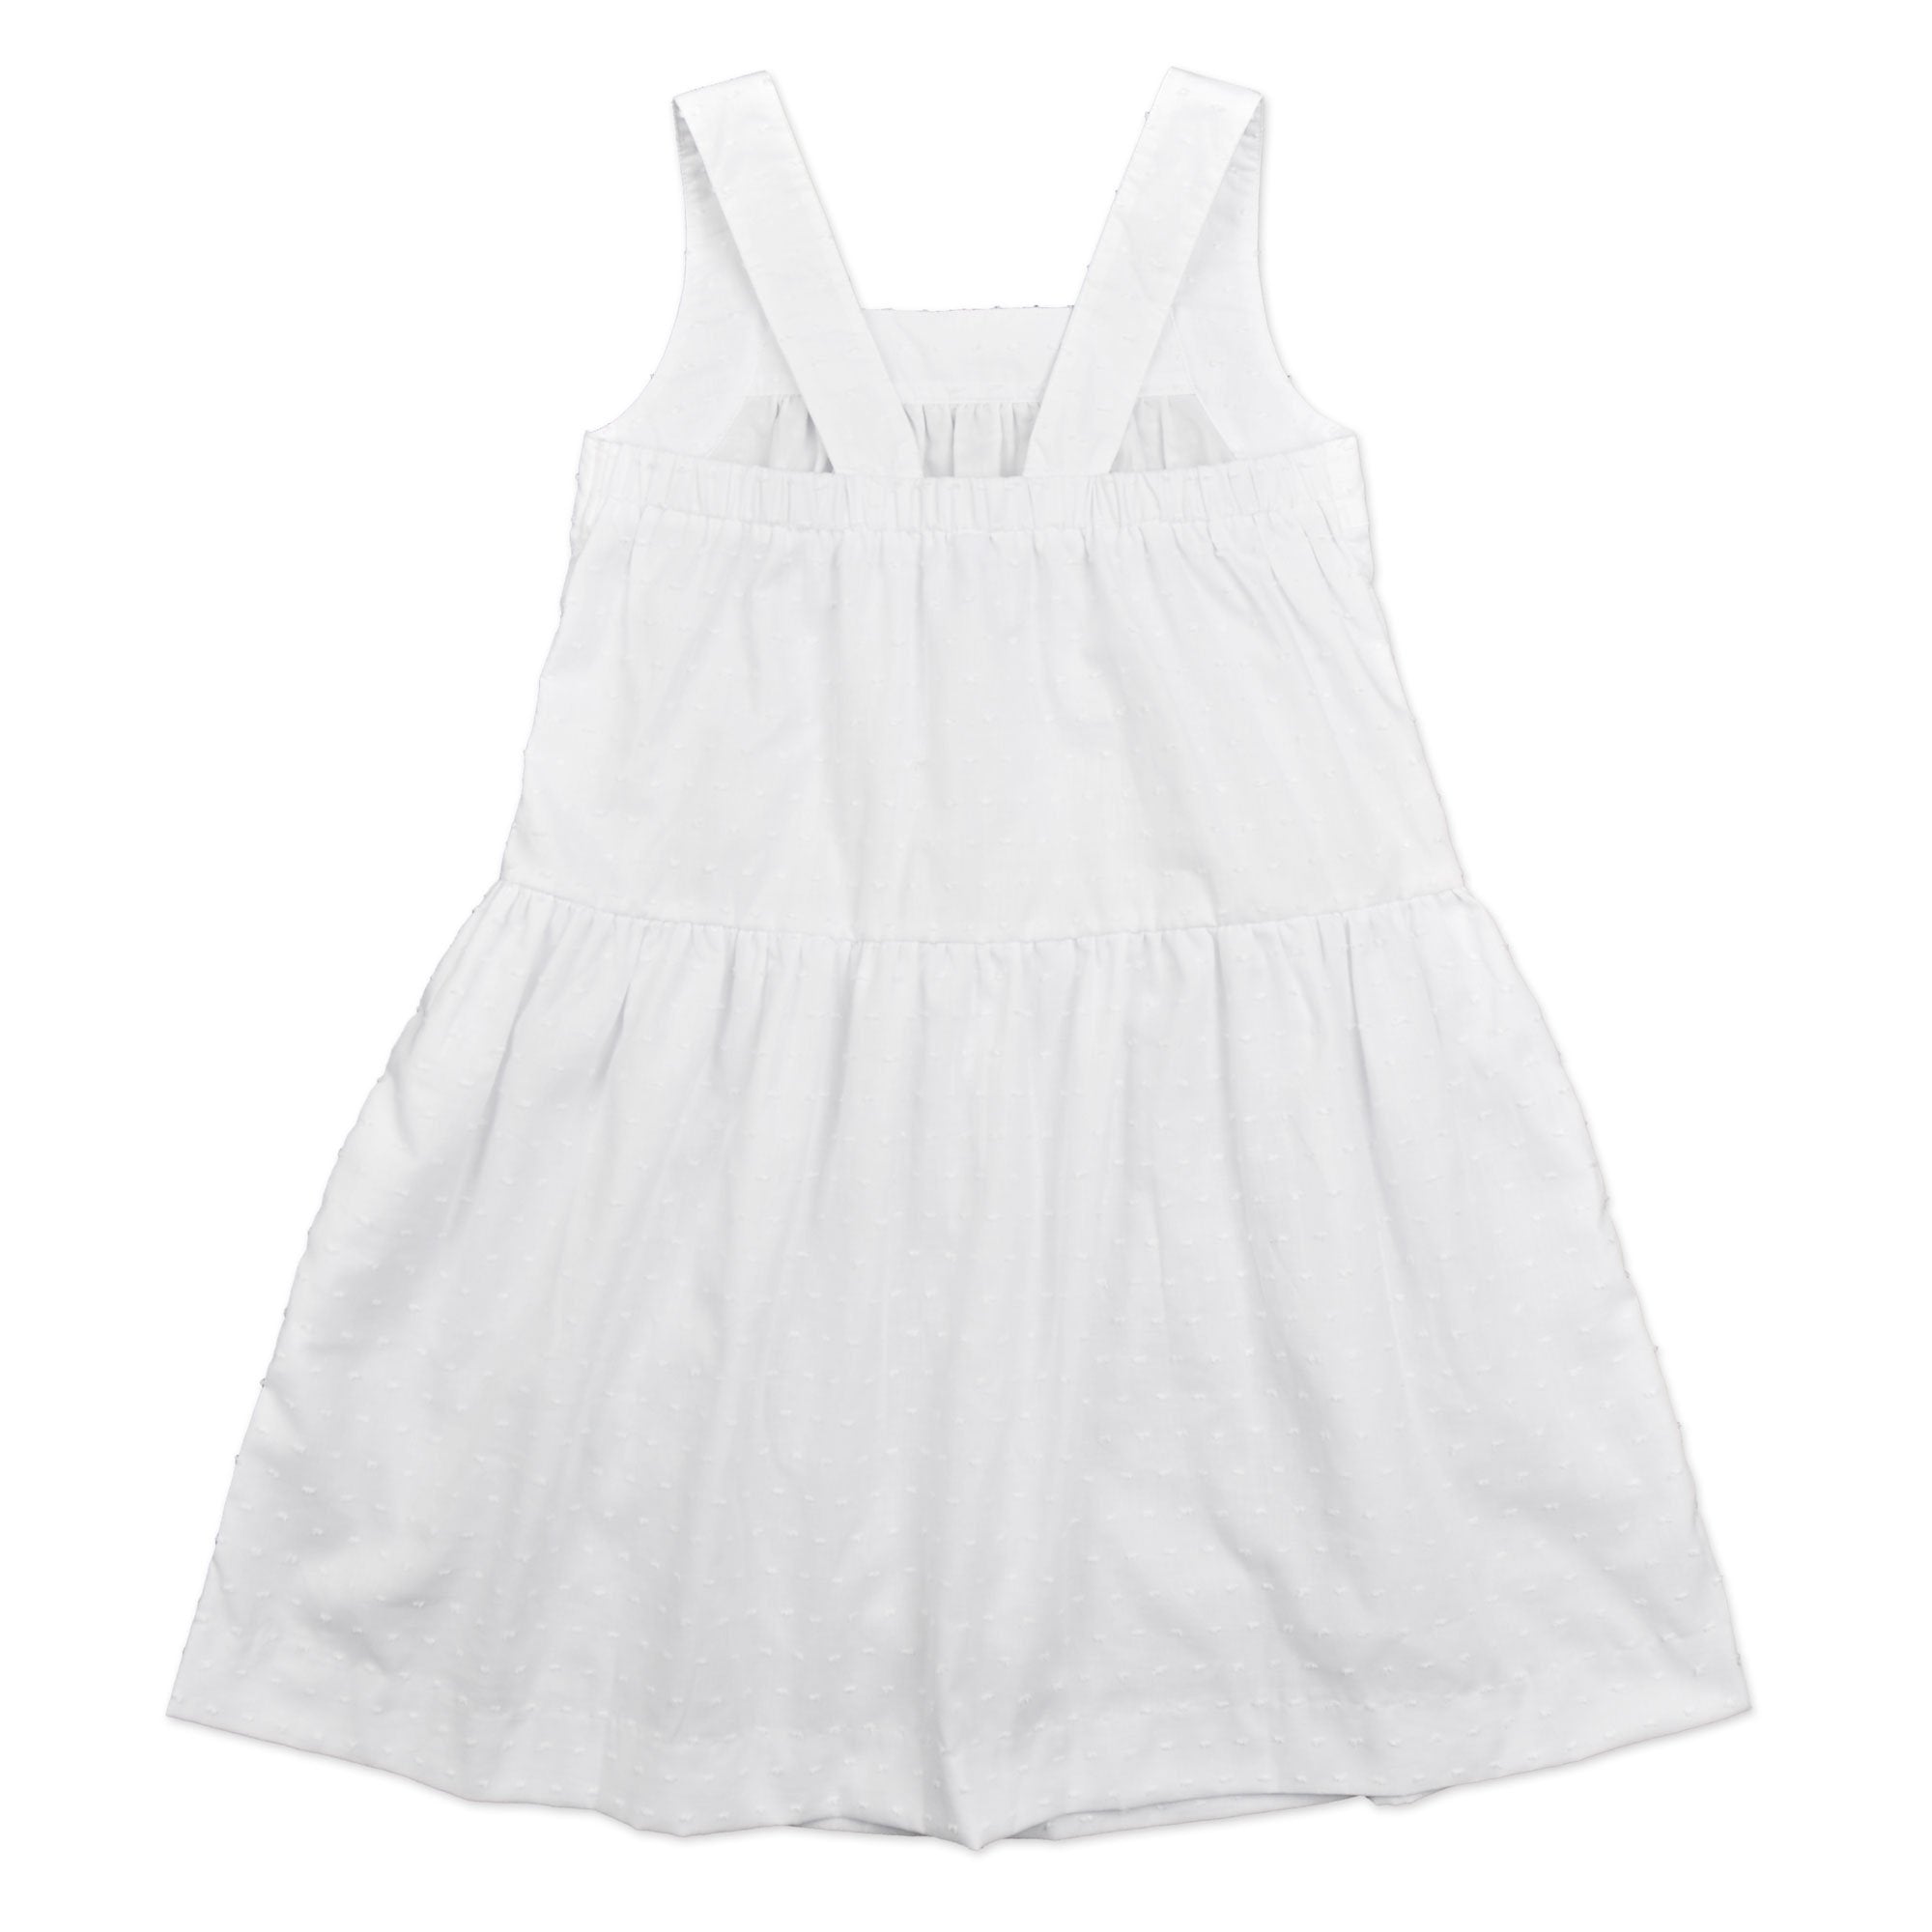 Camilla Dress In White Swiss Dot Cotton - Cou Cou Baby